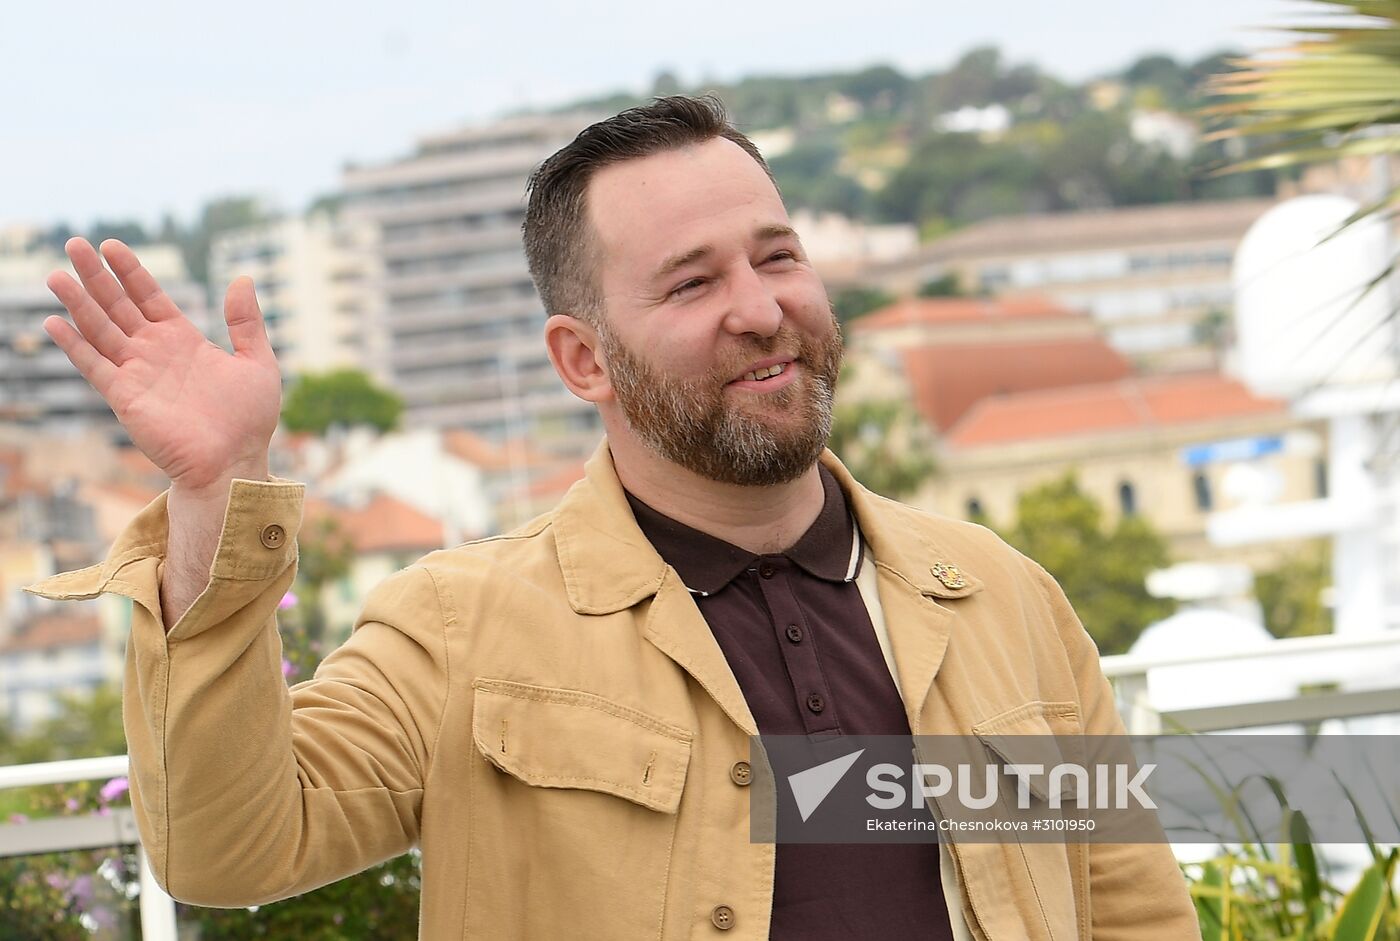 Photocall of Andrei Zvyagintsev's Loeless movie at the Cannes Film Festival